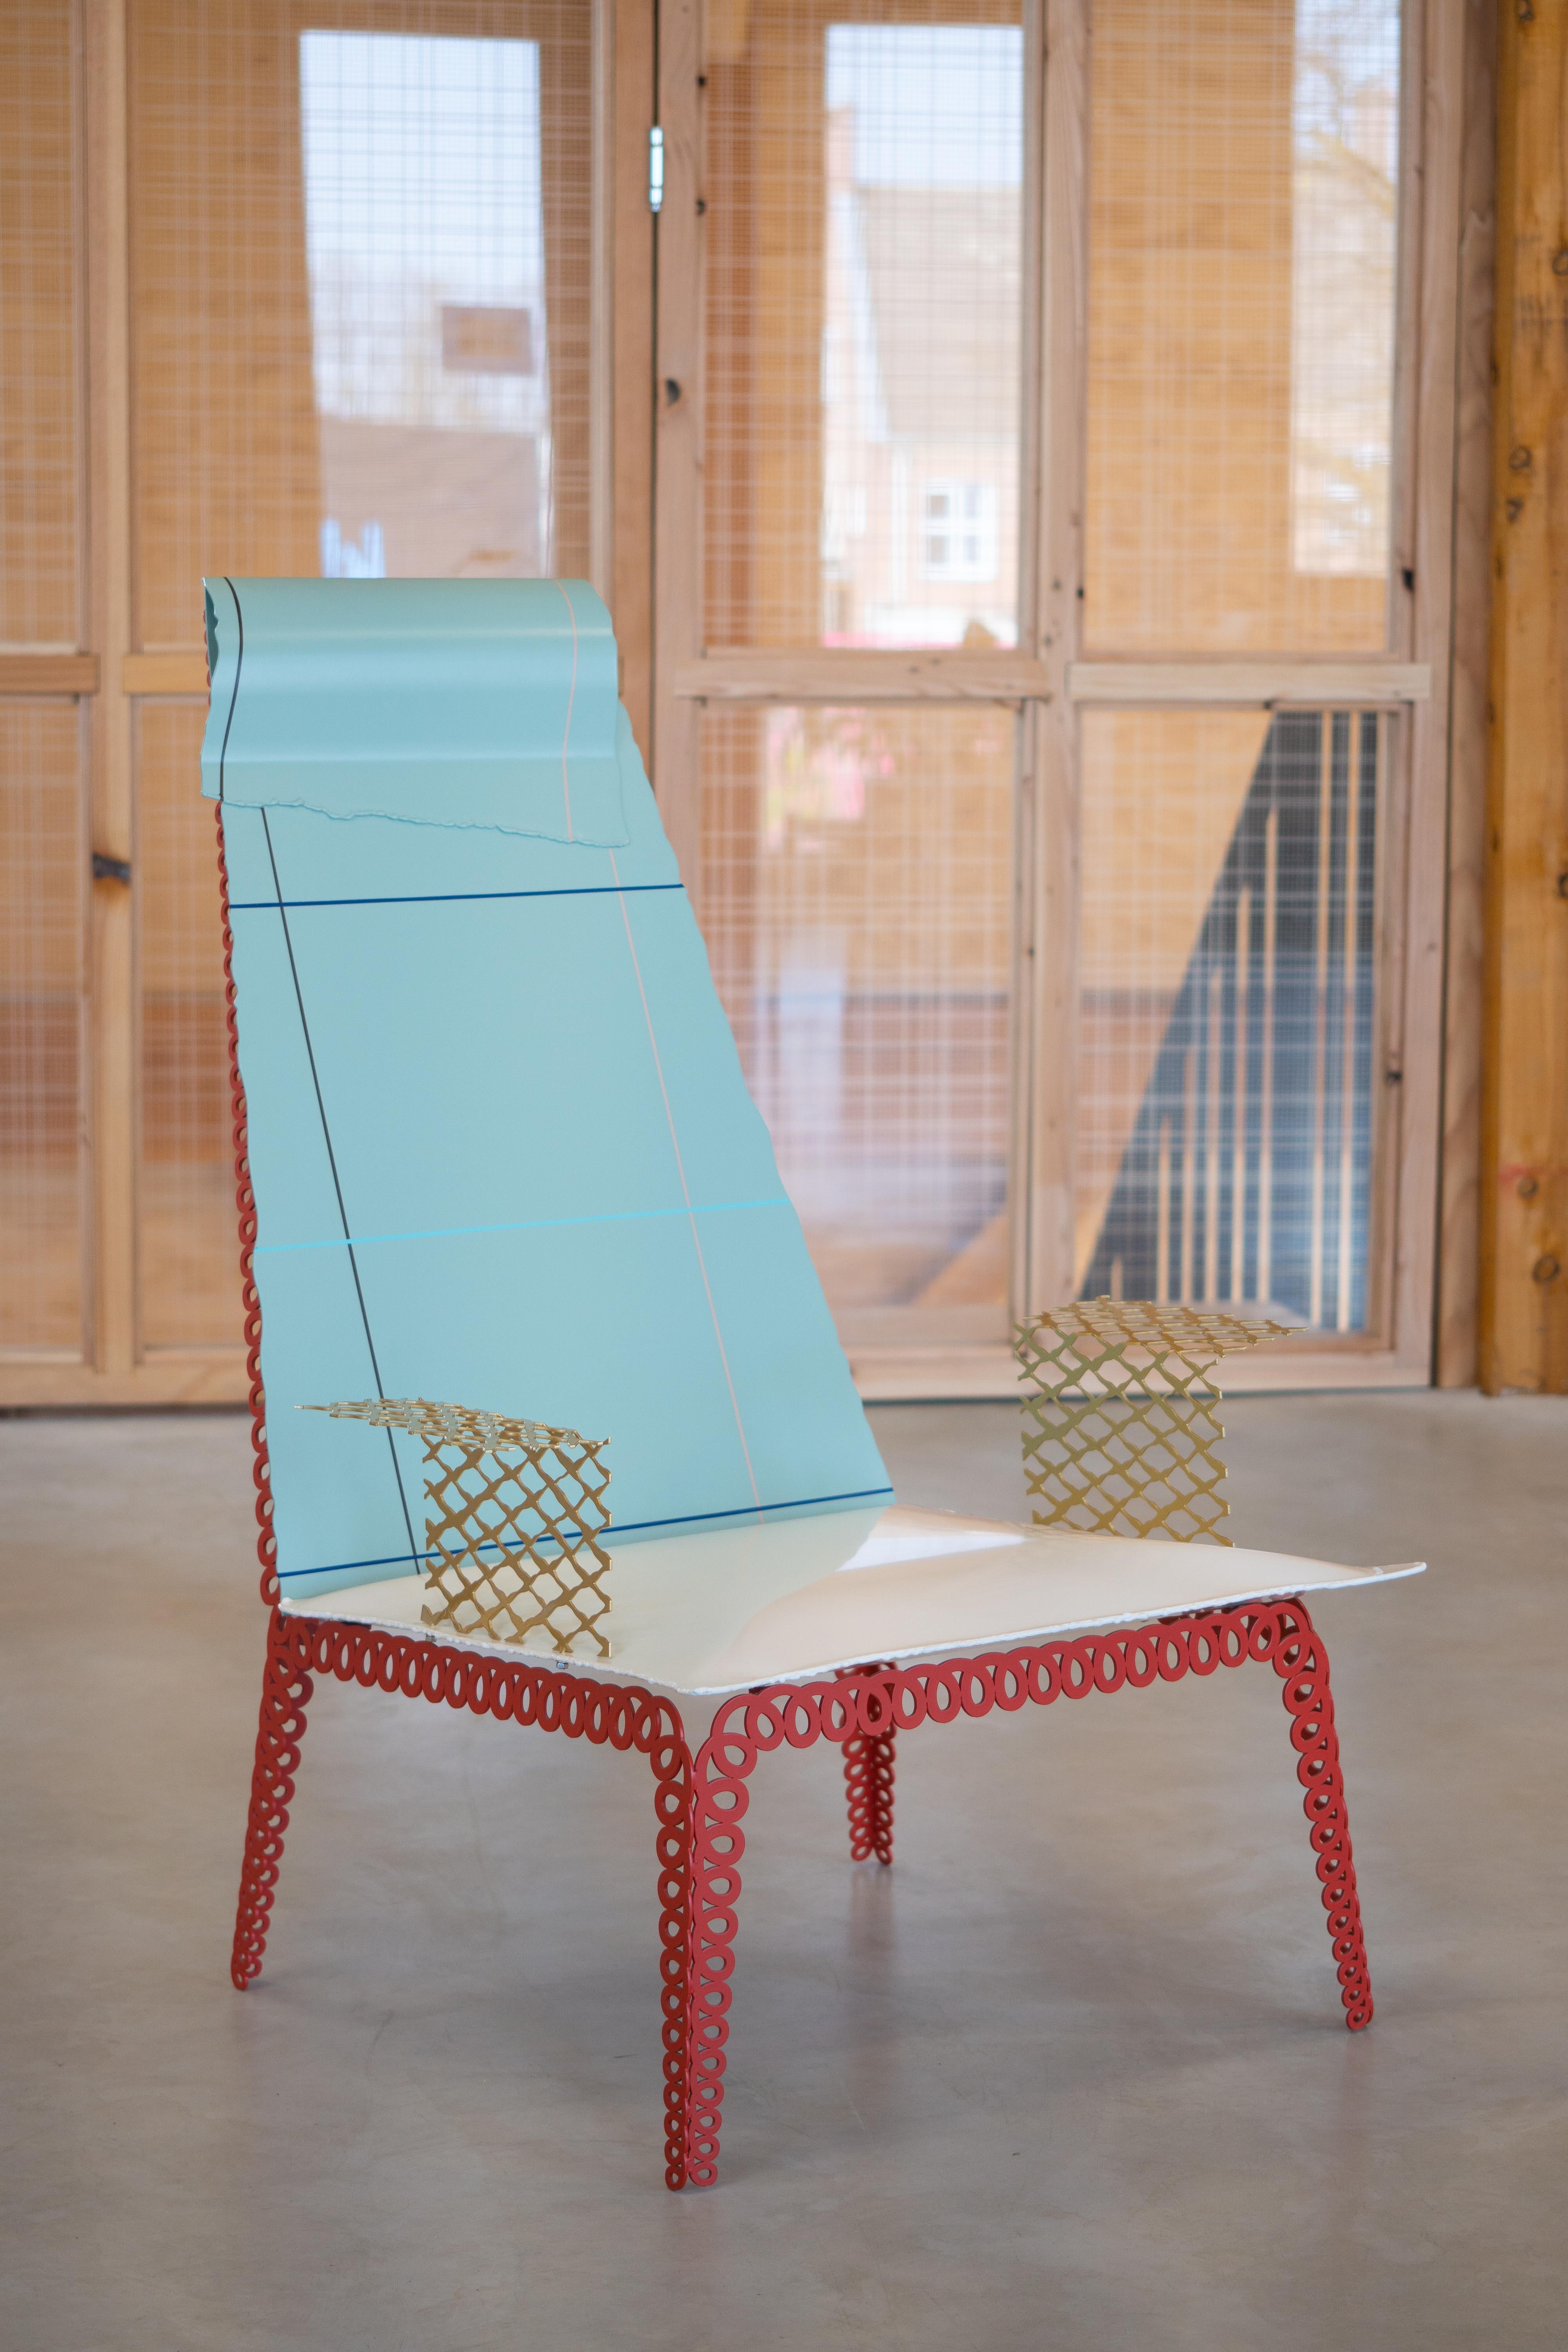 Kiki van Eijk designs a highly conceptual collection of furniture that uses metal to capture the delicate nature of fabric. This collection looks like it's made of textiles but is in fact fashioned from solid metal. KIki uses laser-cutting. Welding